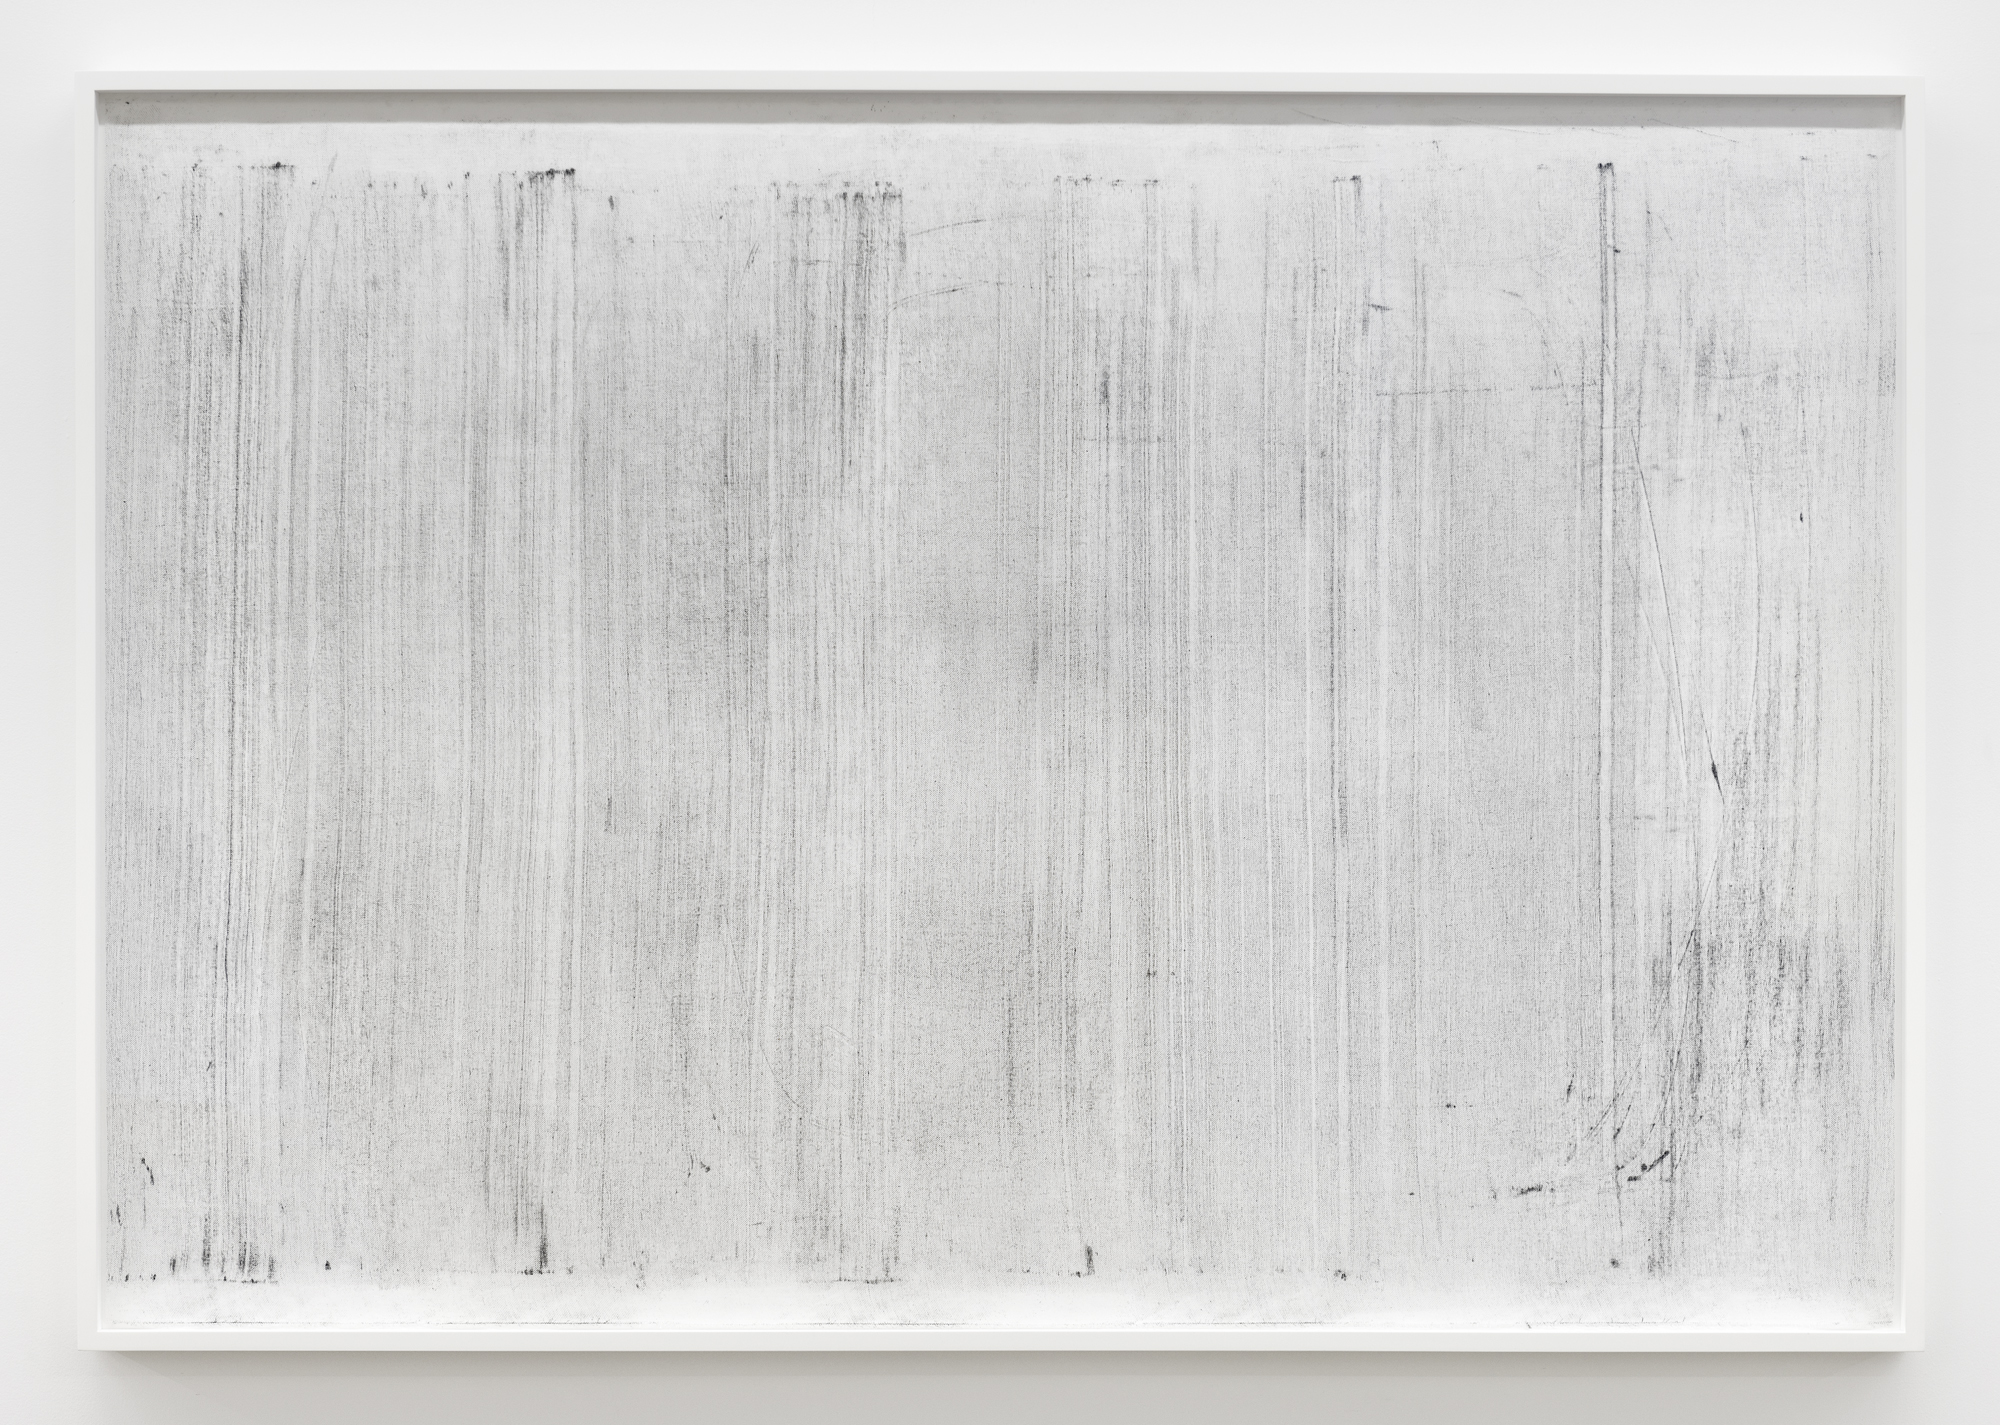   Untitled (where it becomes clear #2),&nbsp; Oil based paint, graphite and charcoal on tarlatan, 2018, 41 x 60 inches 